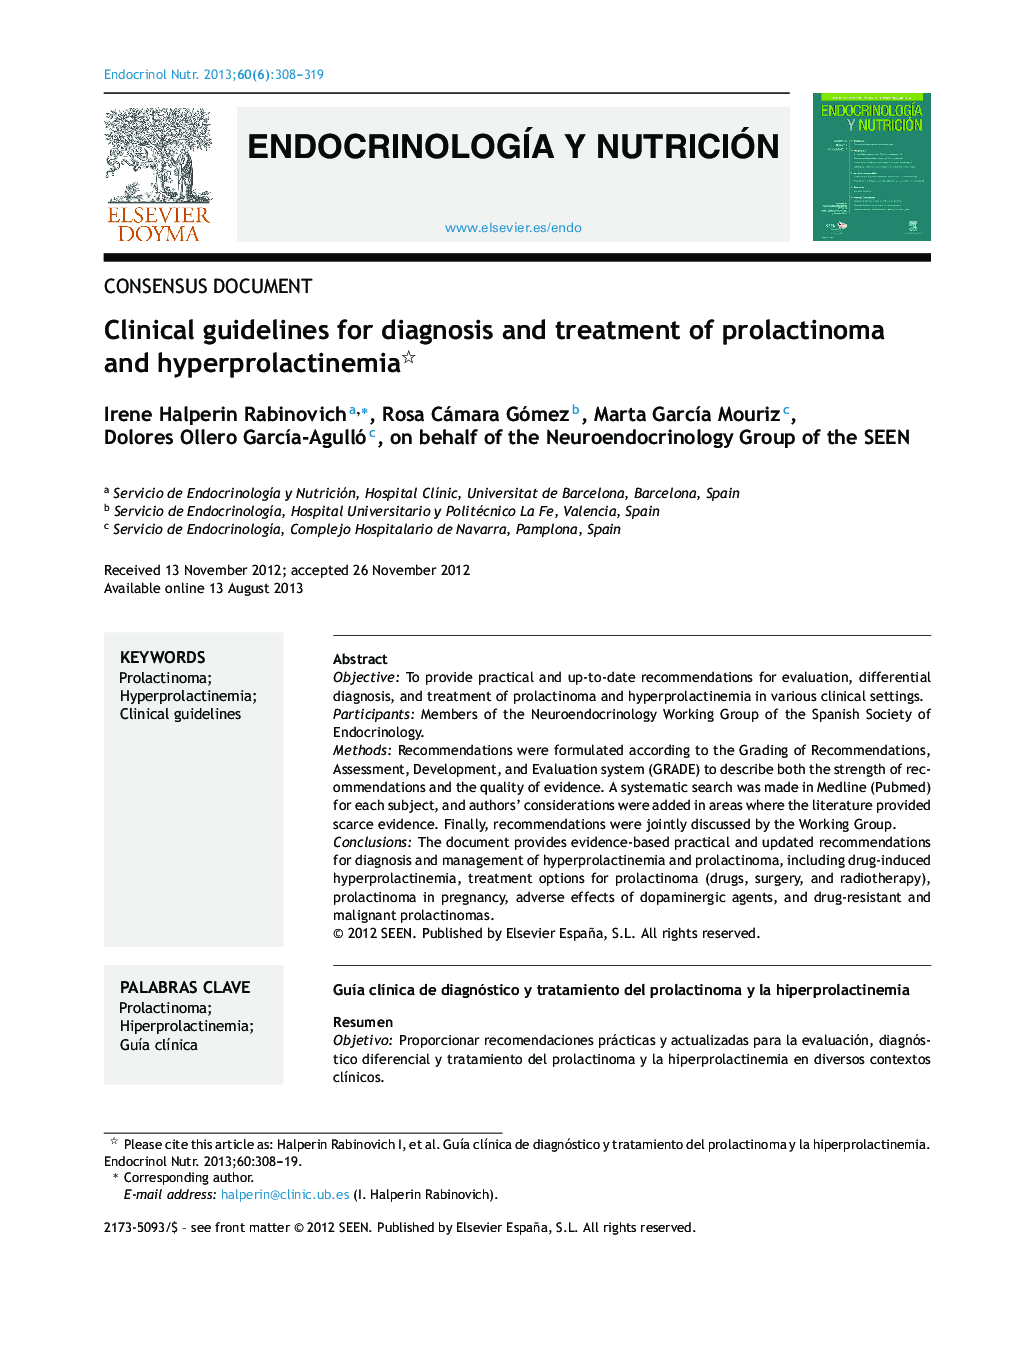 Clinical guidelines for diagnosis and treatment of prolactinoma and hyperprolactinemia 